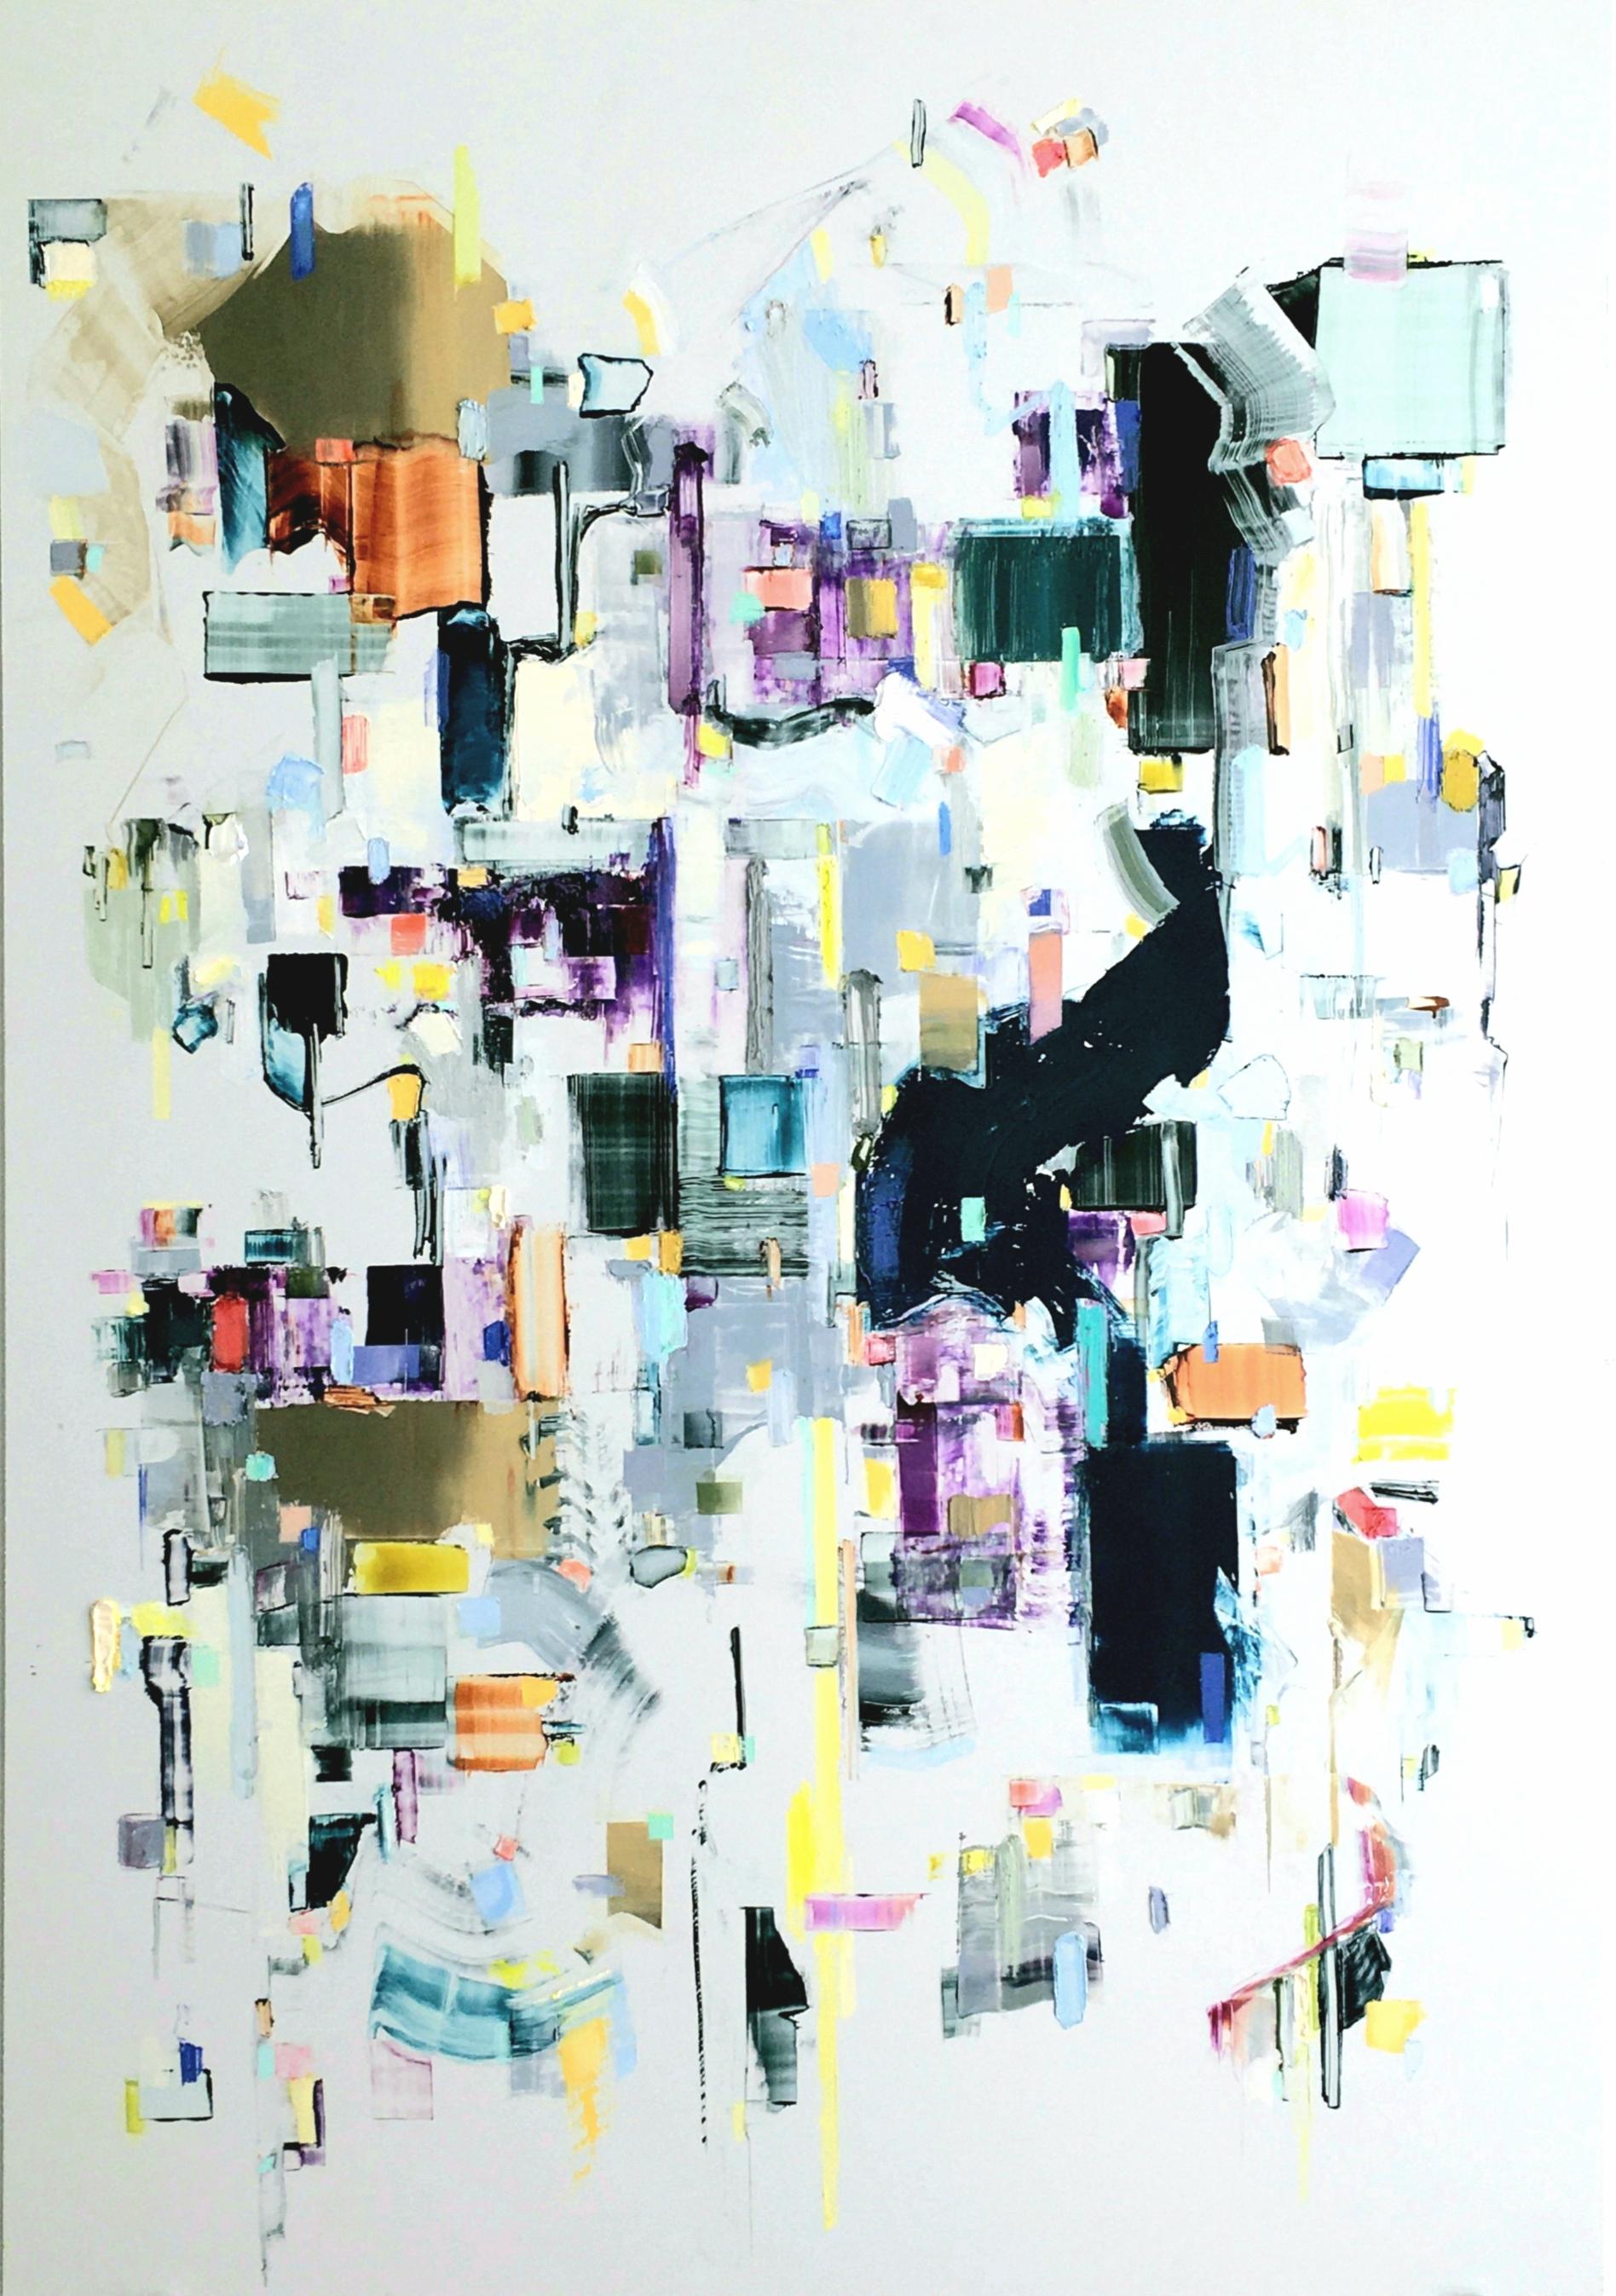 Of Its Own Accord, Contemporary Abstract Urban Oil Painting on Acrylic Panel - Mixed Media Art by Johnny Taylor